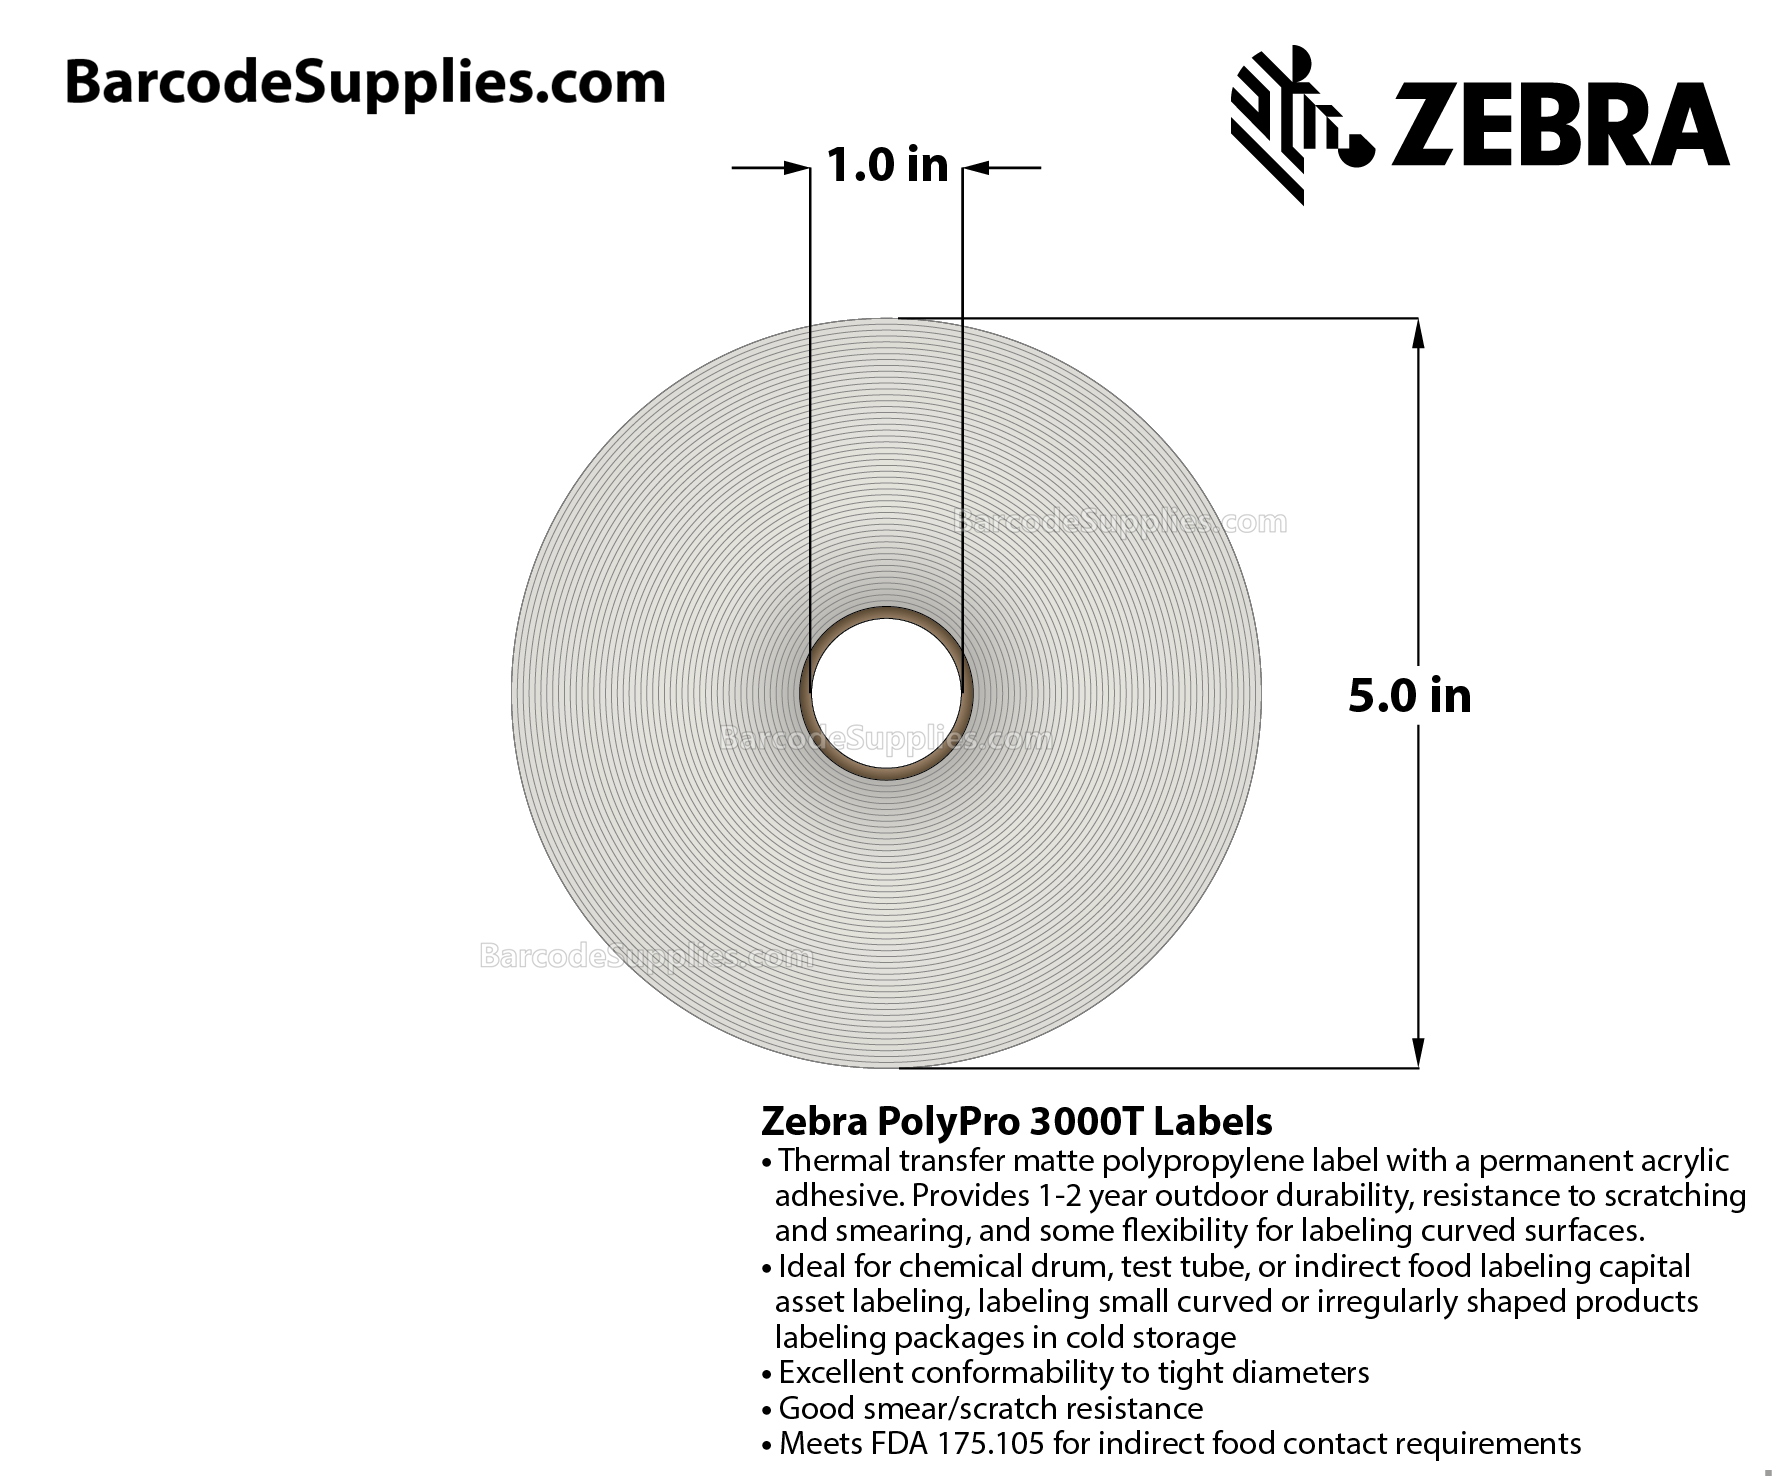 2 x 1.25 Thermal Transfer White PolyPro 3000T Labels With Permanent Adhesive - Perforated - 1720 Labels Per Roll - Carton Of 8 Rolls - 13760 Labels Total - MPN: 18925